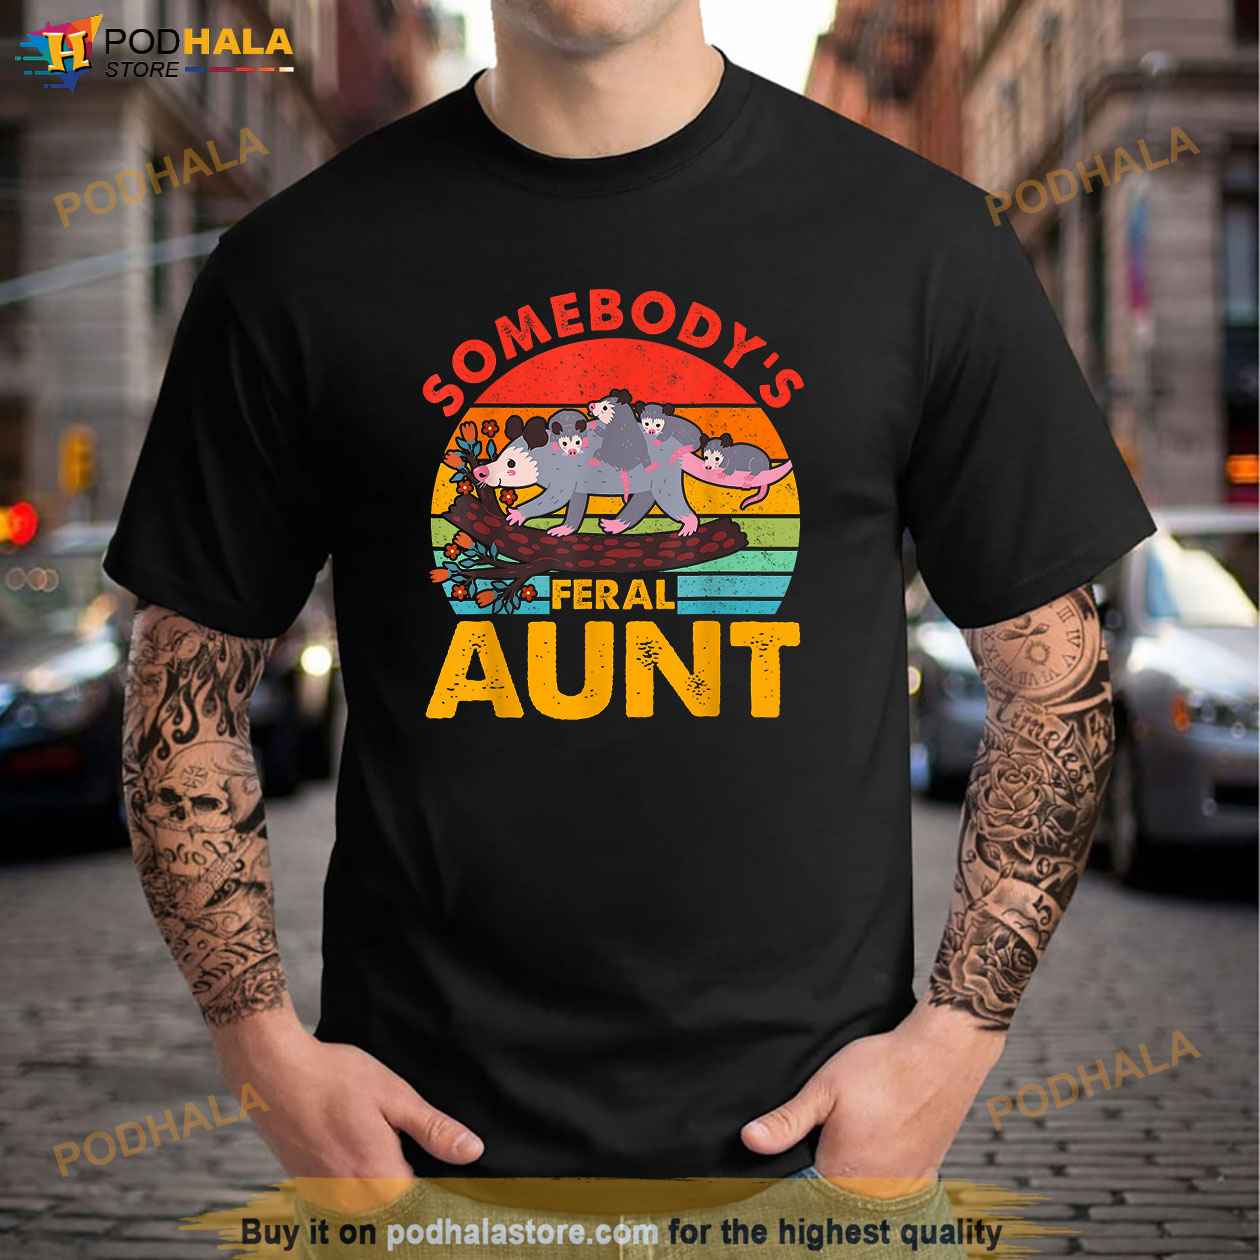 Somebody's Feral Aunt Shirt, Cool Design Unisex T Shirt Tee Tops